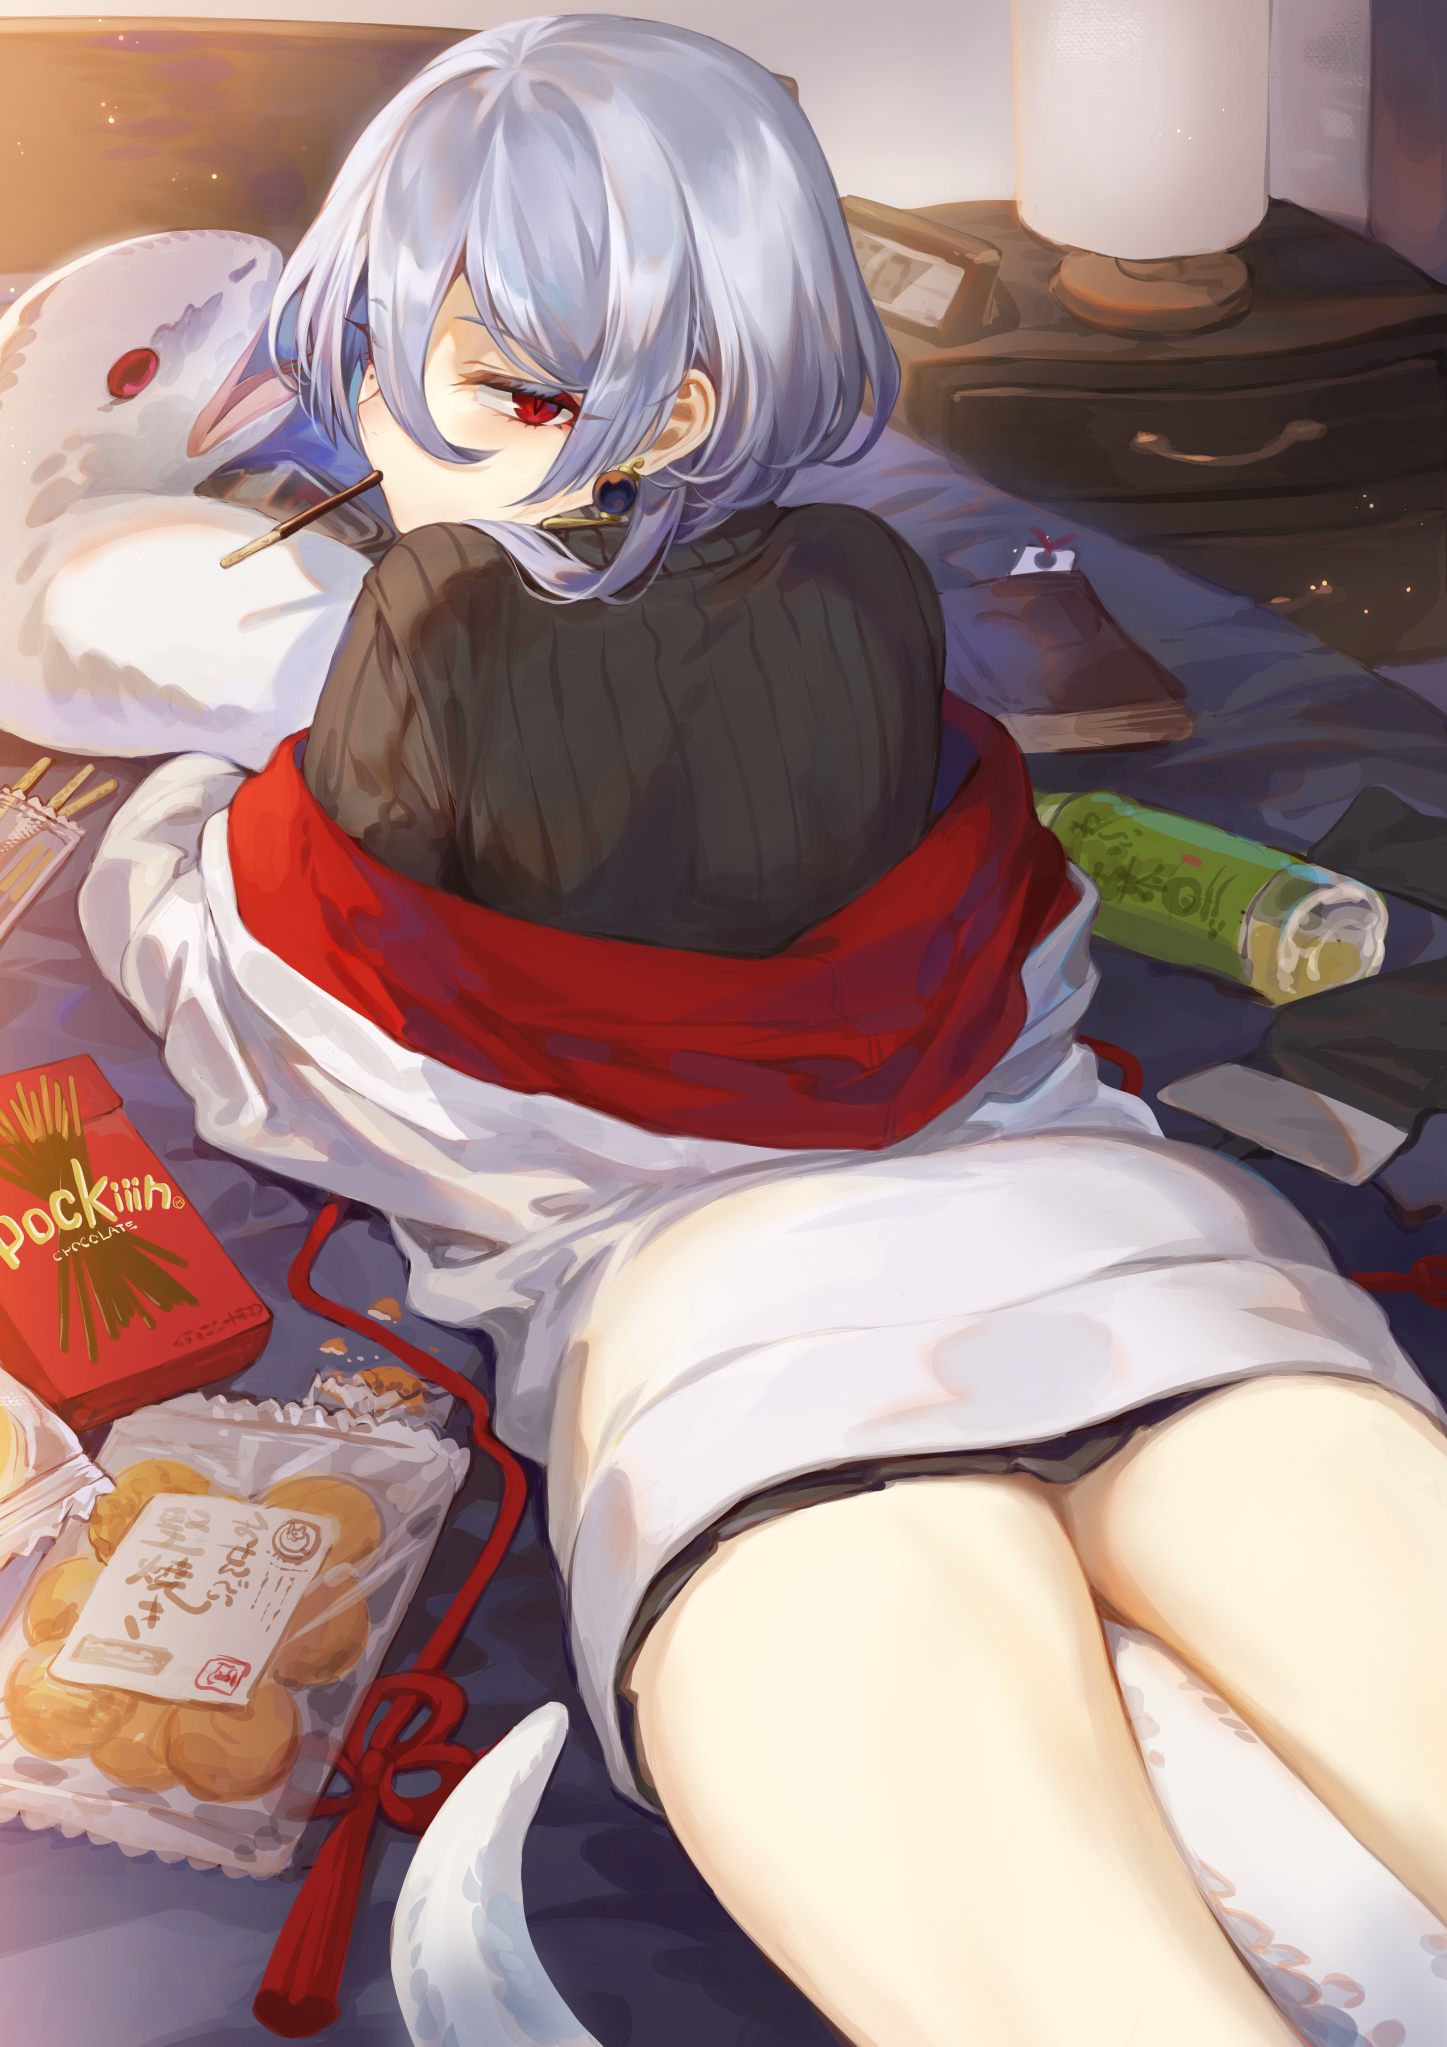 Anime 1447x2047 anime anime girls 2D digital art artwork portrait display in bed lying on front ass silver hair red eyes food snacks Mashu 003